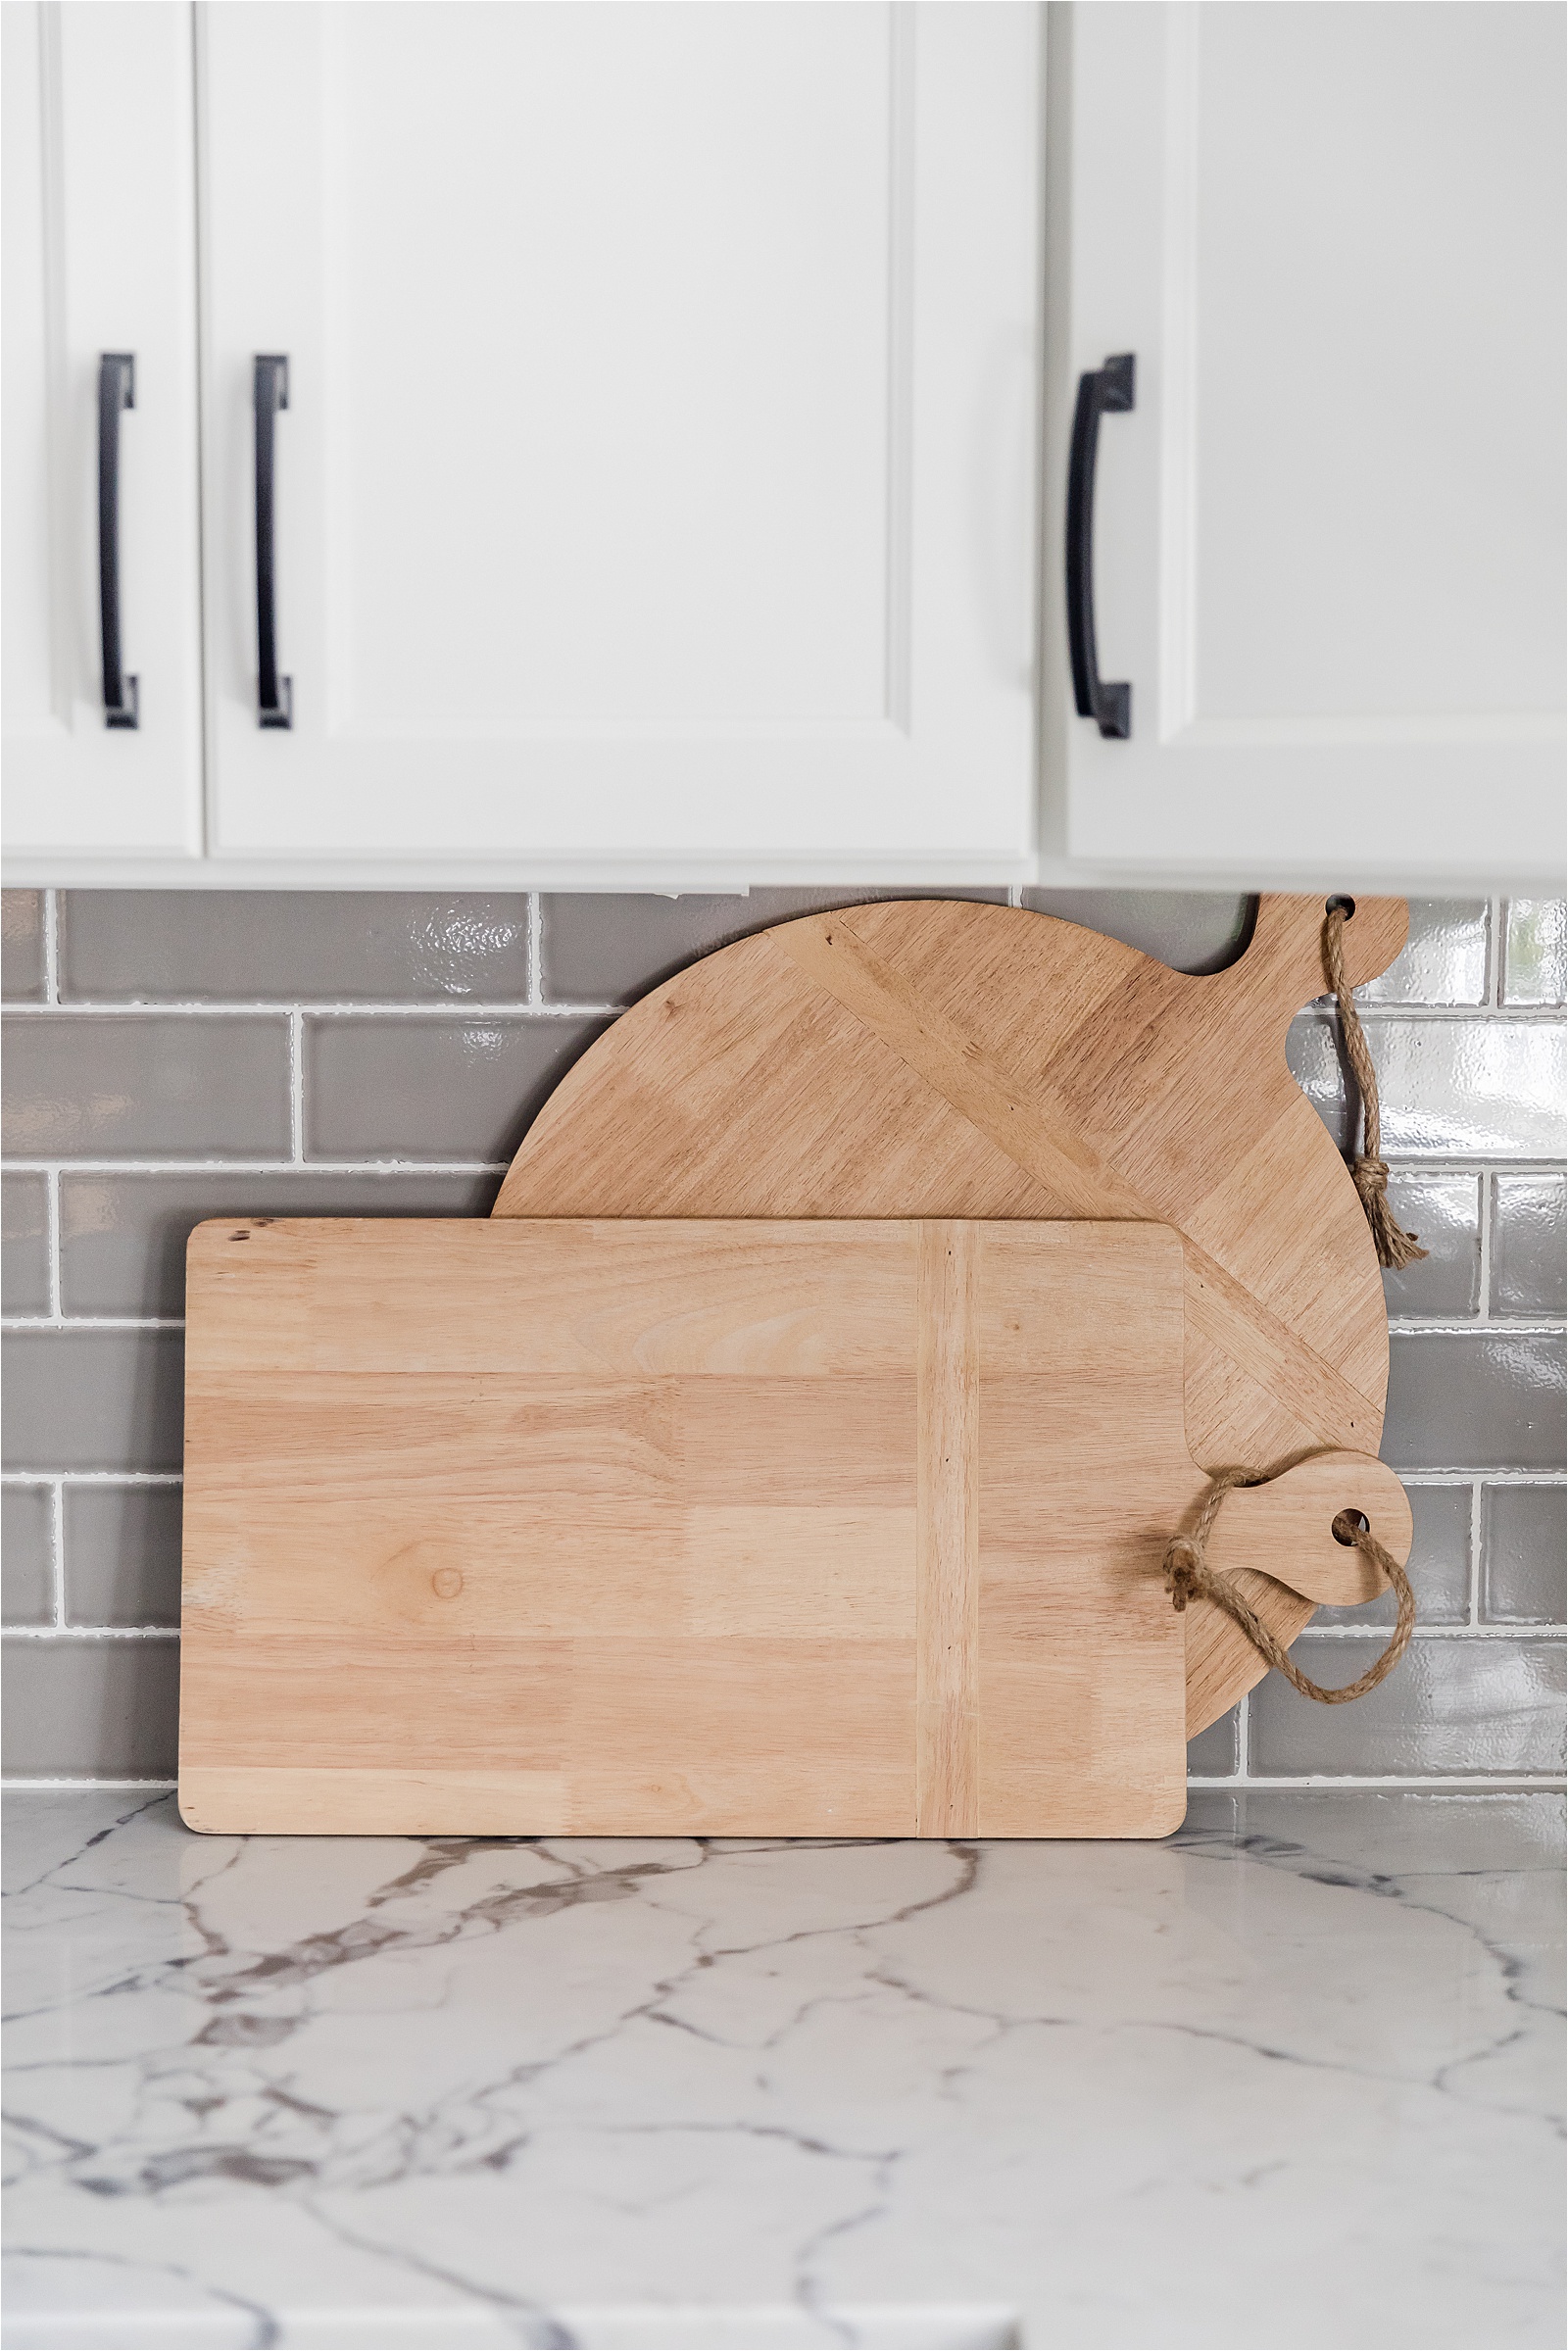 two cutting boards in front of grey subway tile backsplash